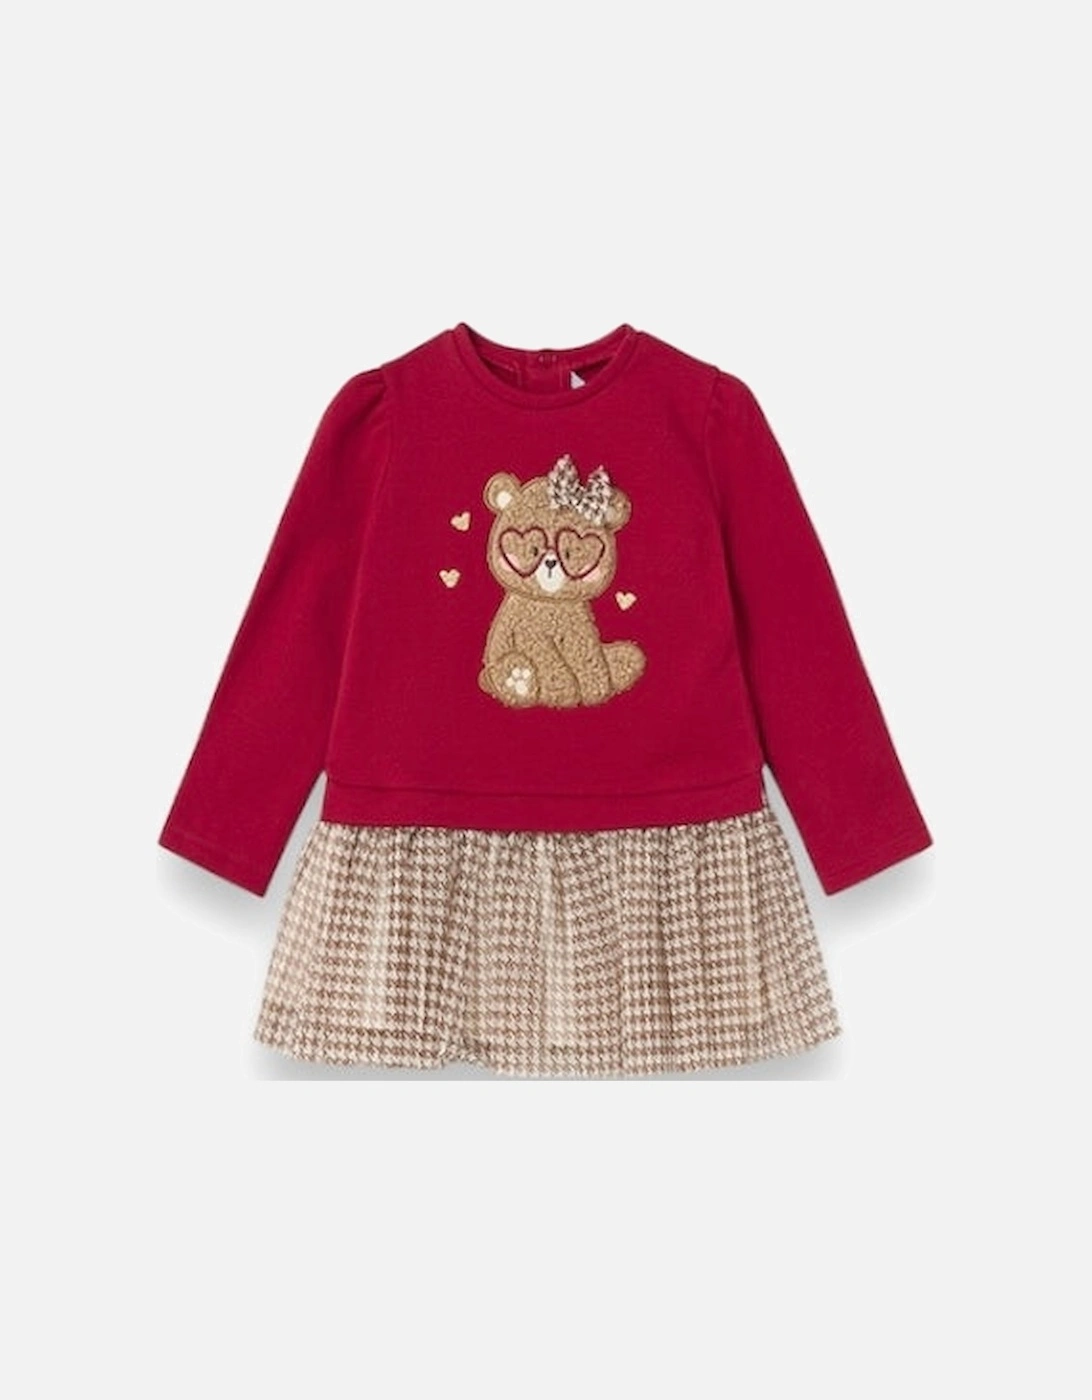 Mayoral Red Teddy Bear Dress - Size: 24 months